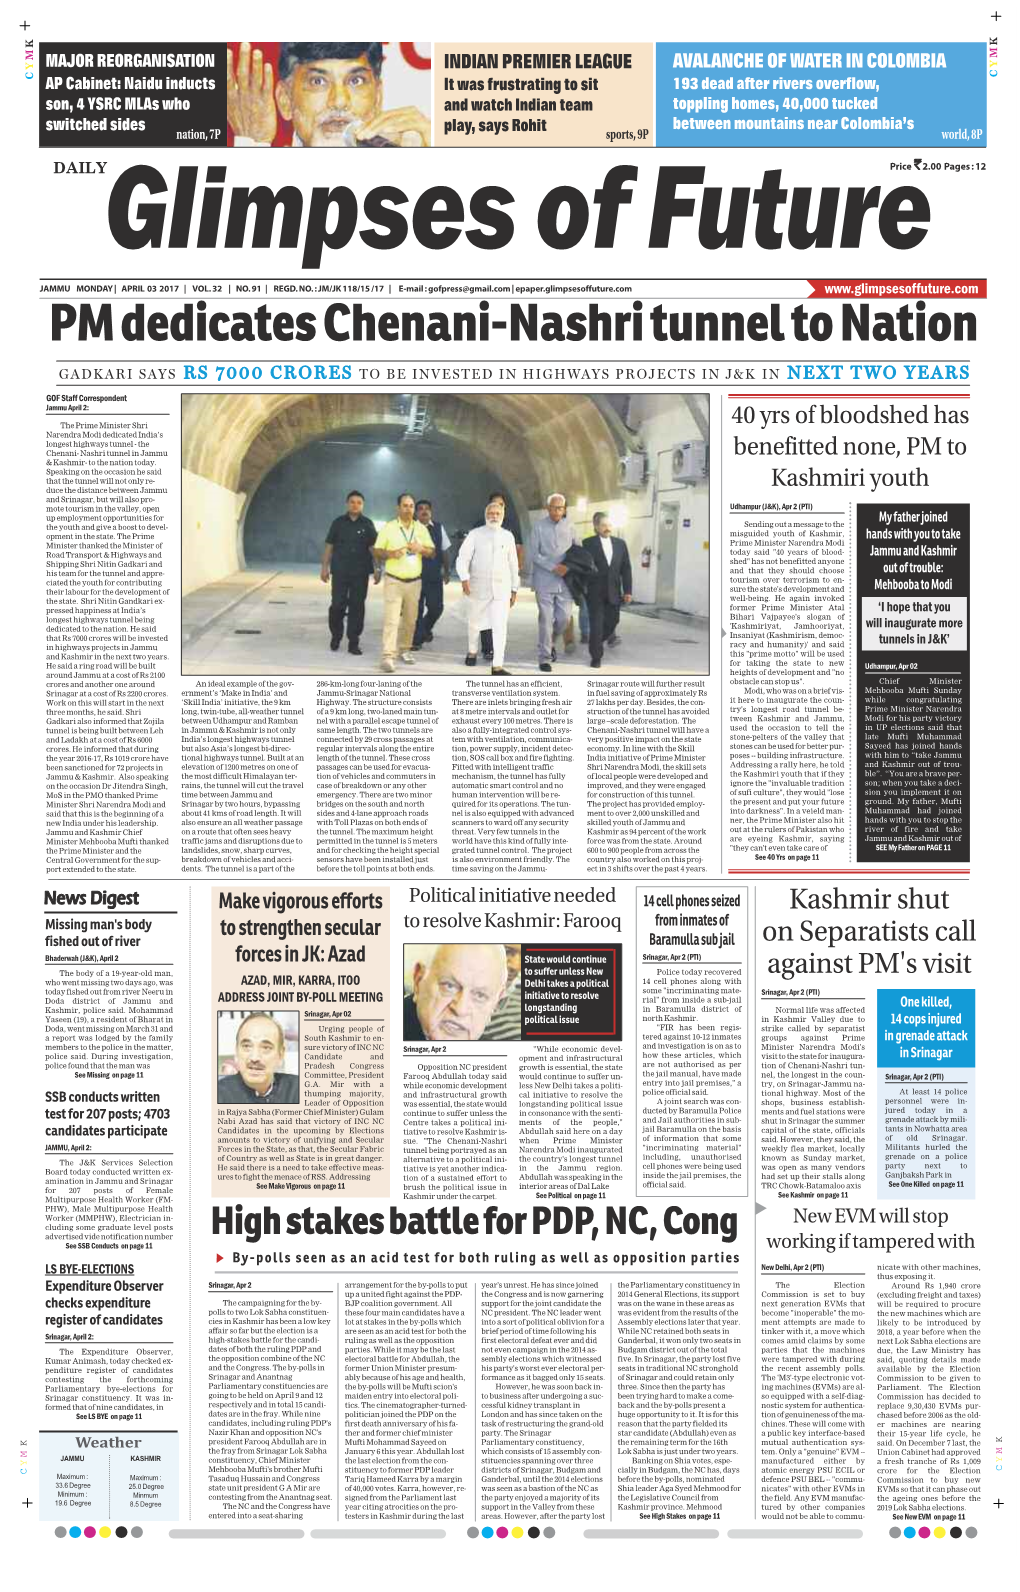 PM Dedicates Chenani-Nashri Tunnel to Nation to Tunnel Chenani-Nashri Dedicates PM Aid That This Is the Beginning of a Iated the Youth for Contributing Rores